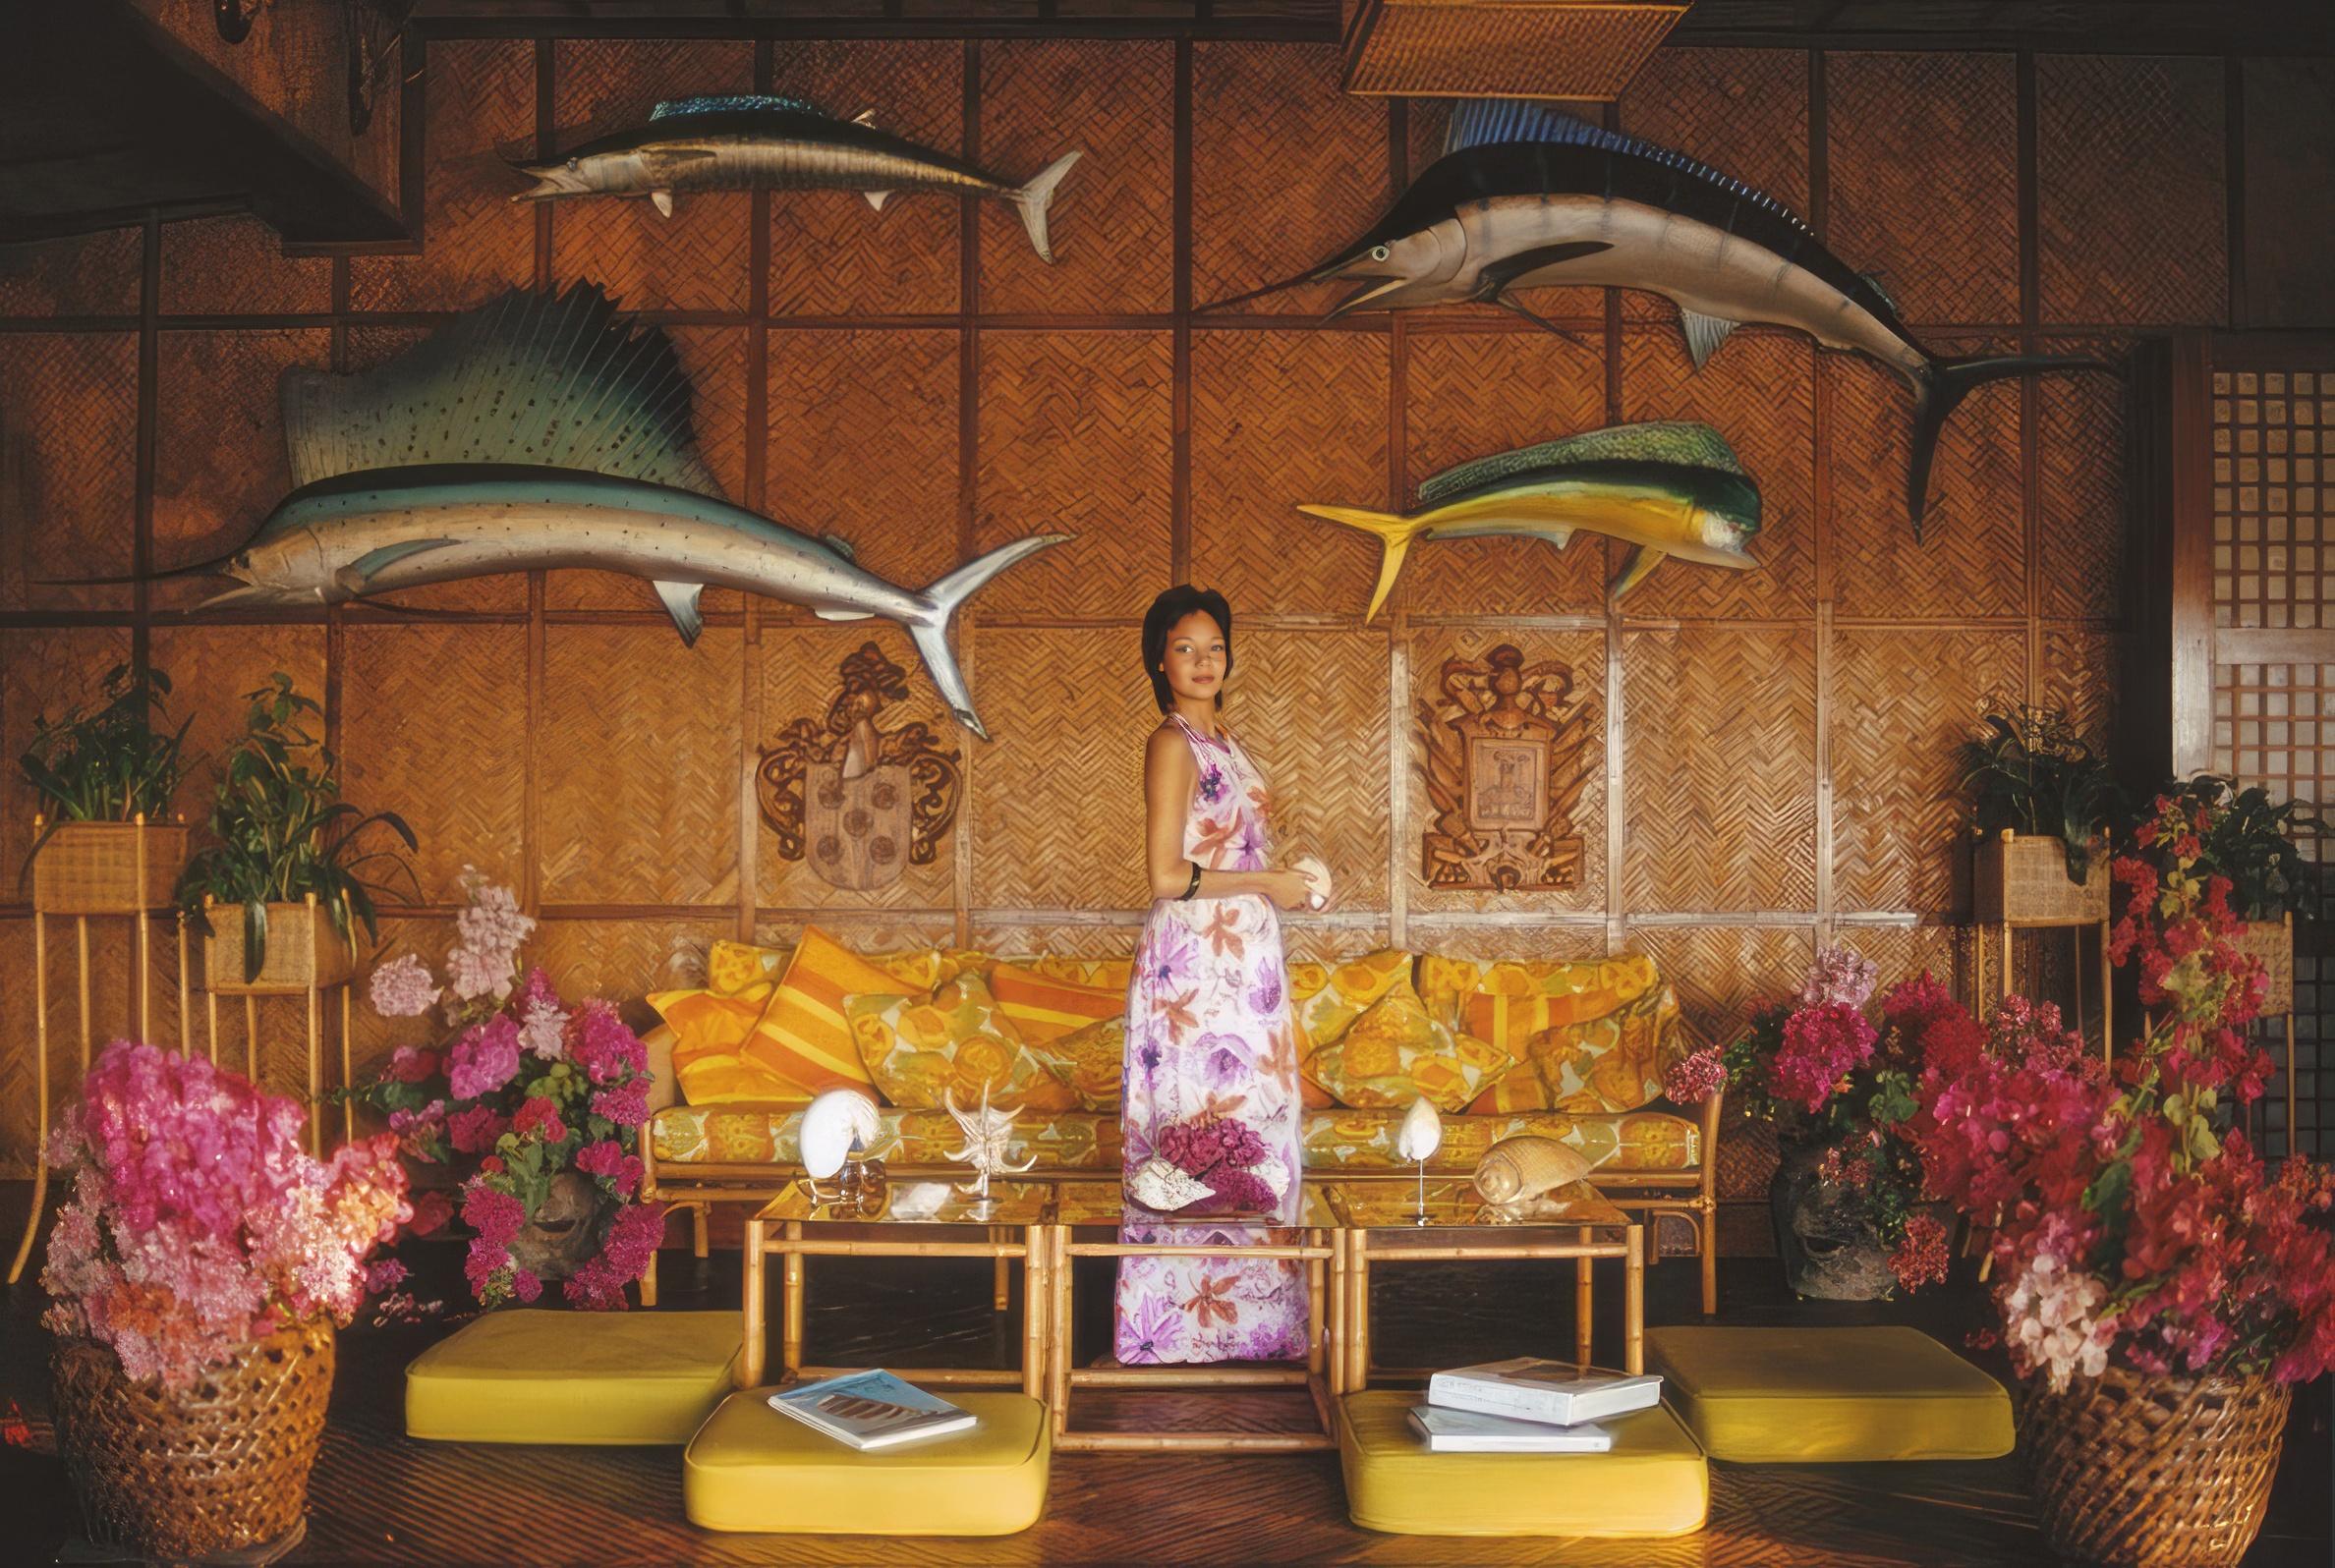 Slim Aarons
Private Island
1973
C print
Estate stamped and hand numbered edition of 150 with certificate of authenticity from the estate.   

Mary Lau Toda's private island in the Philippines, November 1973. (Photo by Slim Aarons/Hulton